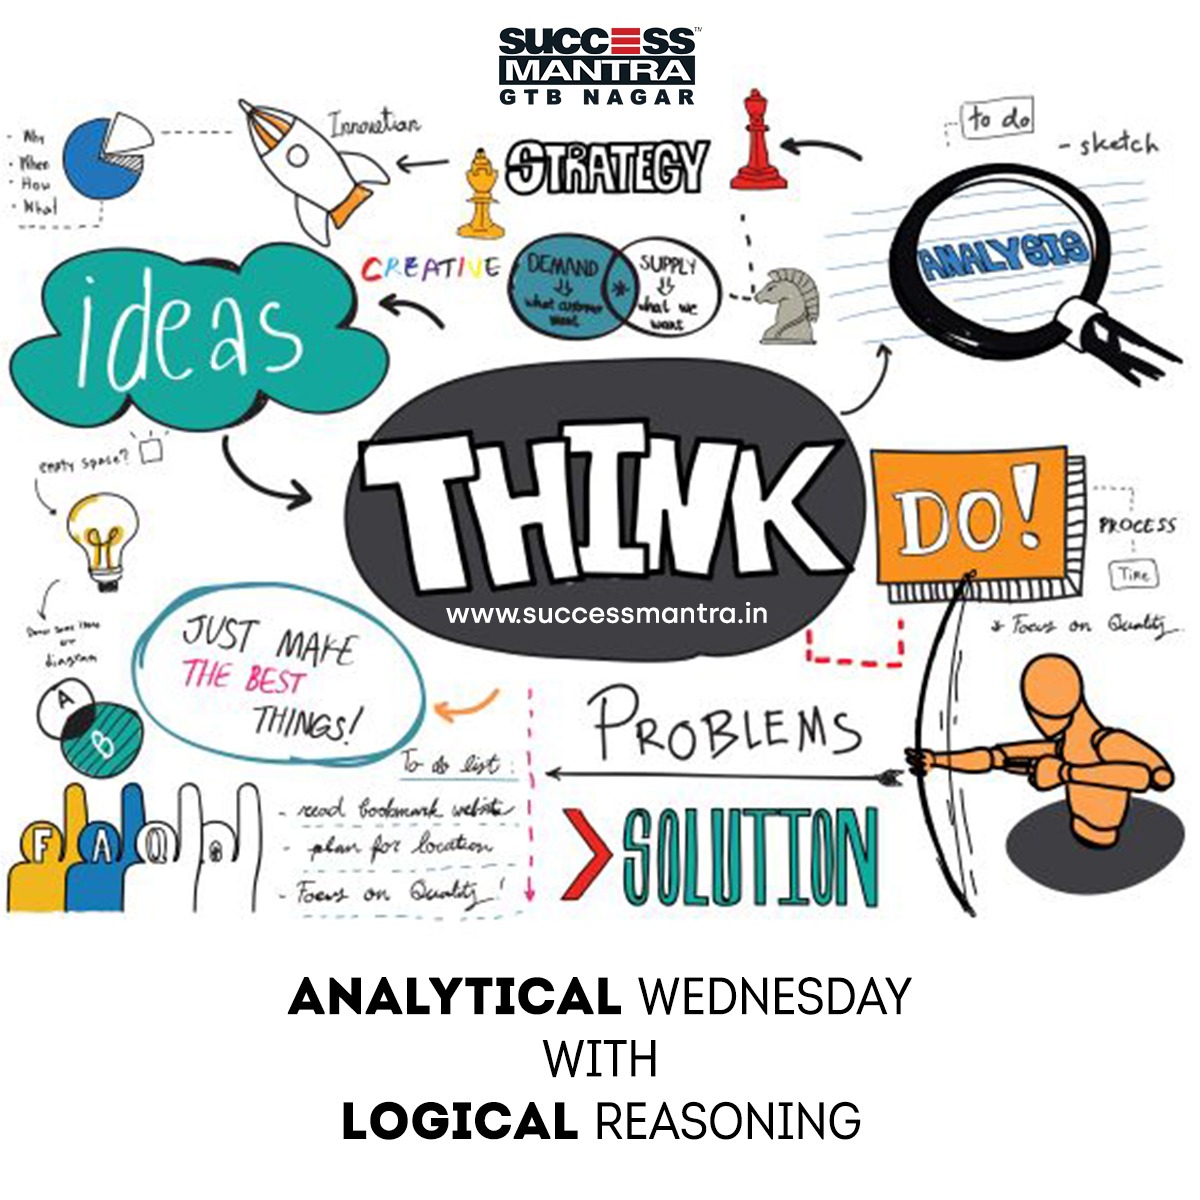 Questions on Logical Reasoning SMLRQ043